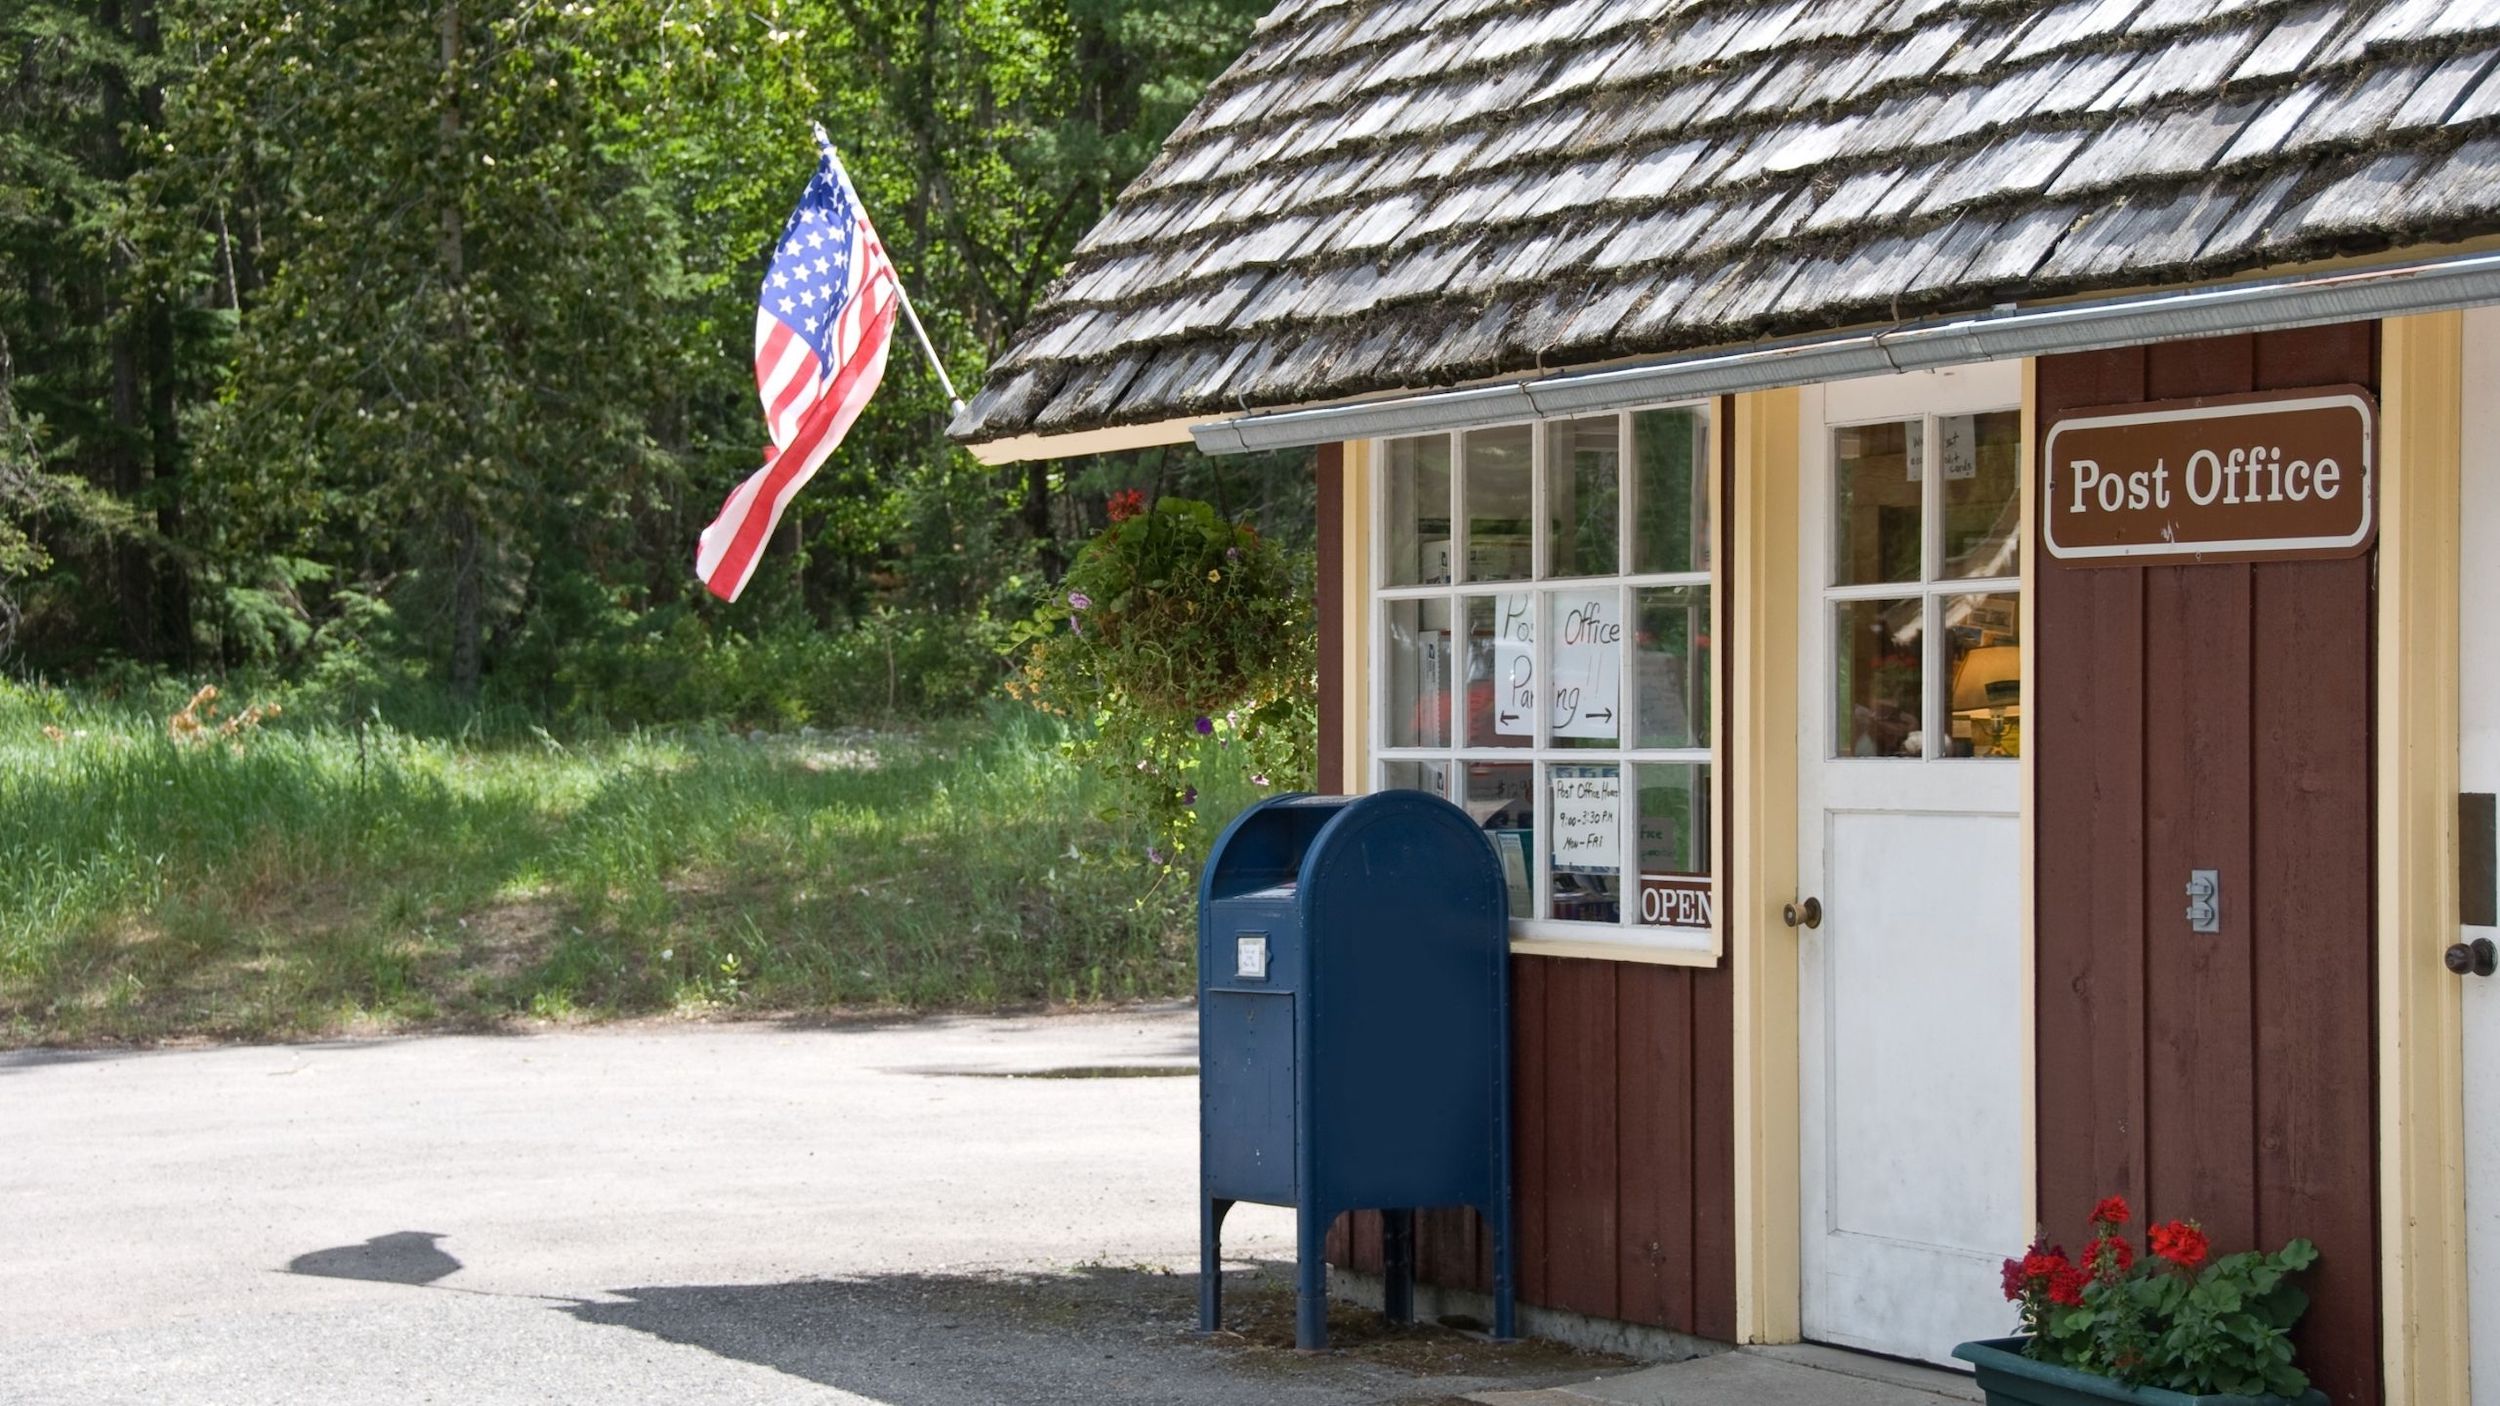 Rural town post office with blue box in front and american flag flying.